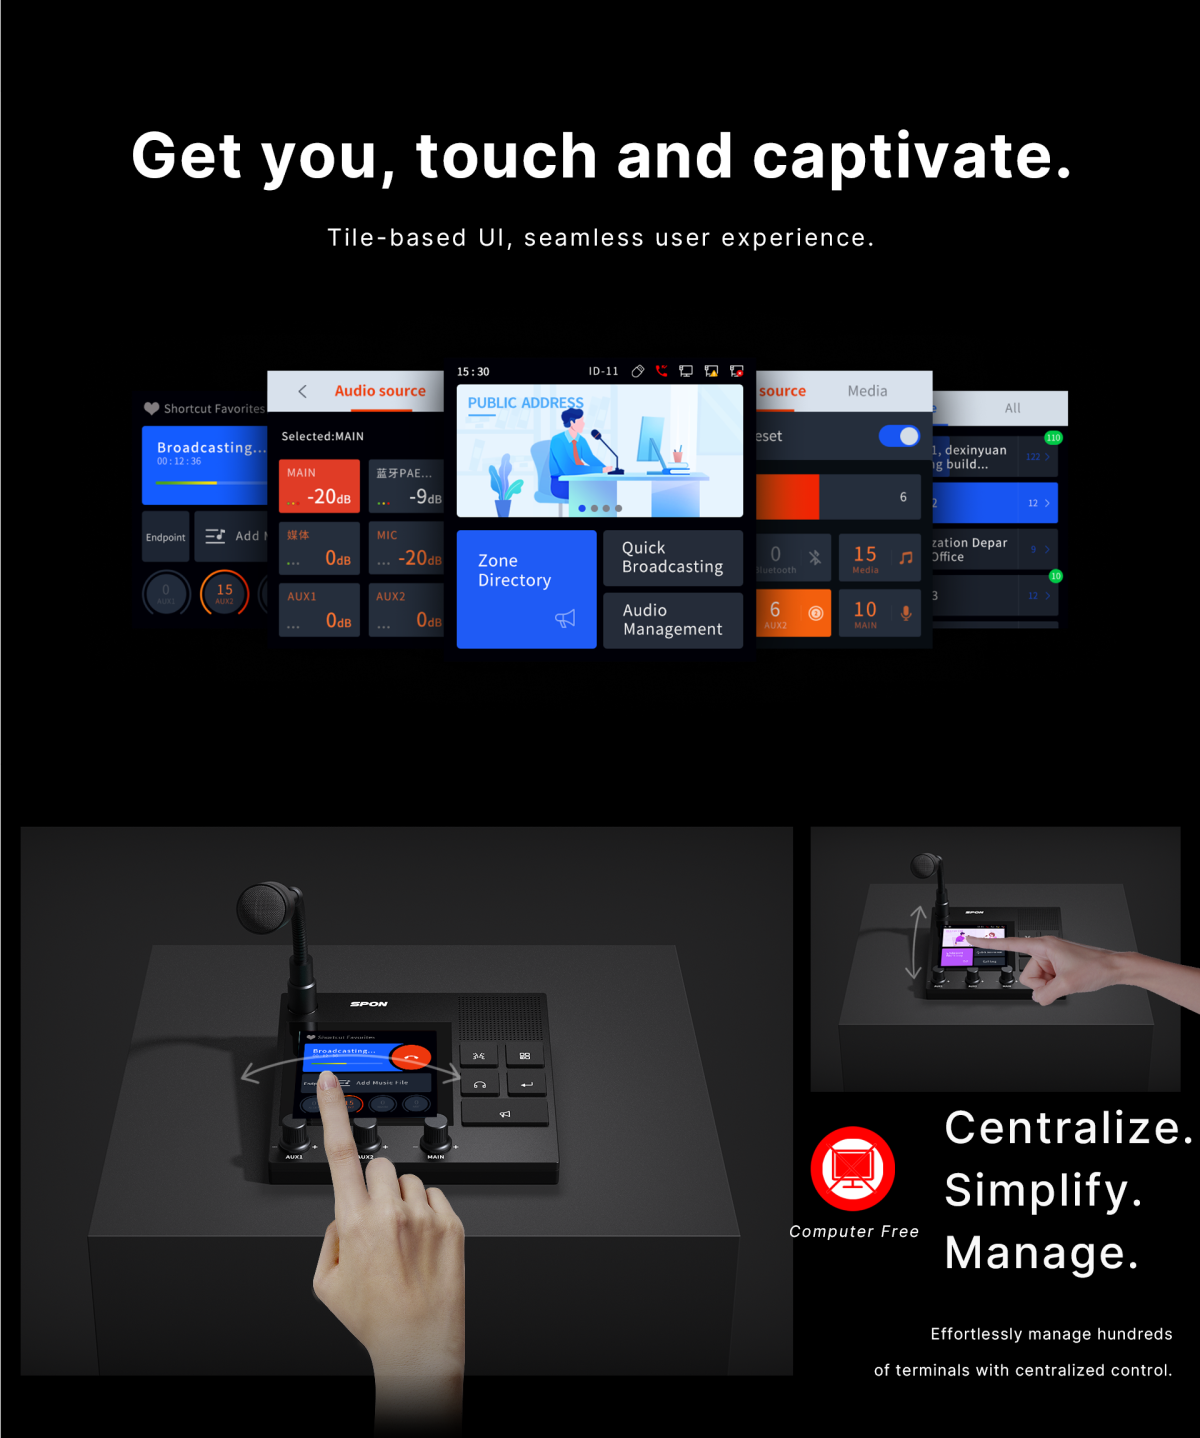 tile-based ui, seamless user experience, centrallized, simplify, manage; effortlessly manage hundreds of terminals with centrallized control. IP paging console, more than just microphone, mixer, bluetooth, remote update, mobile connectivity, touch screen